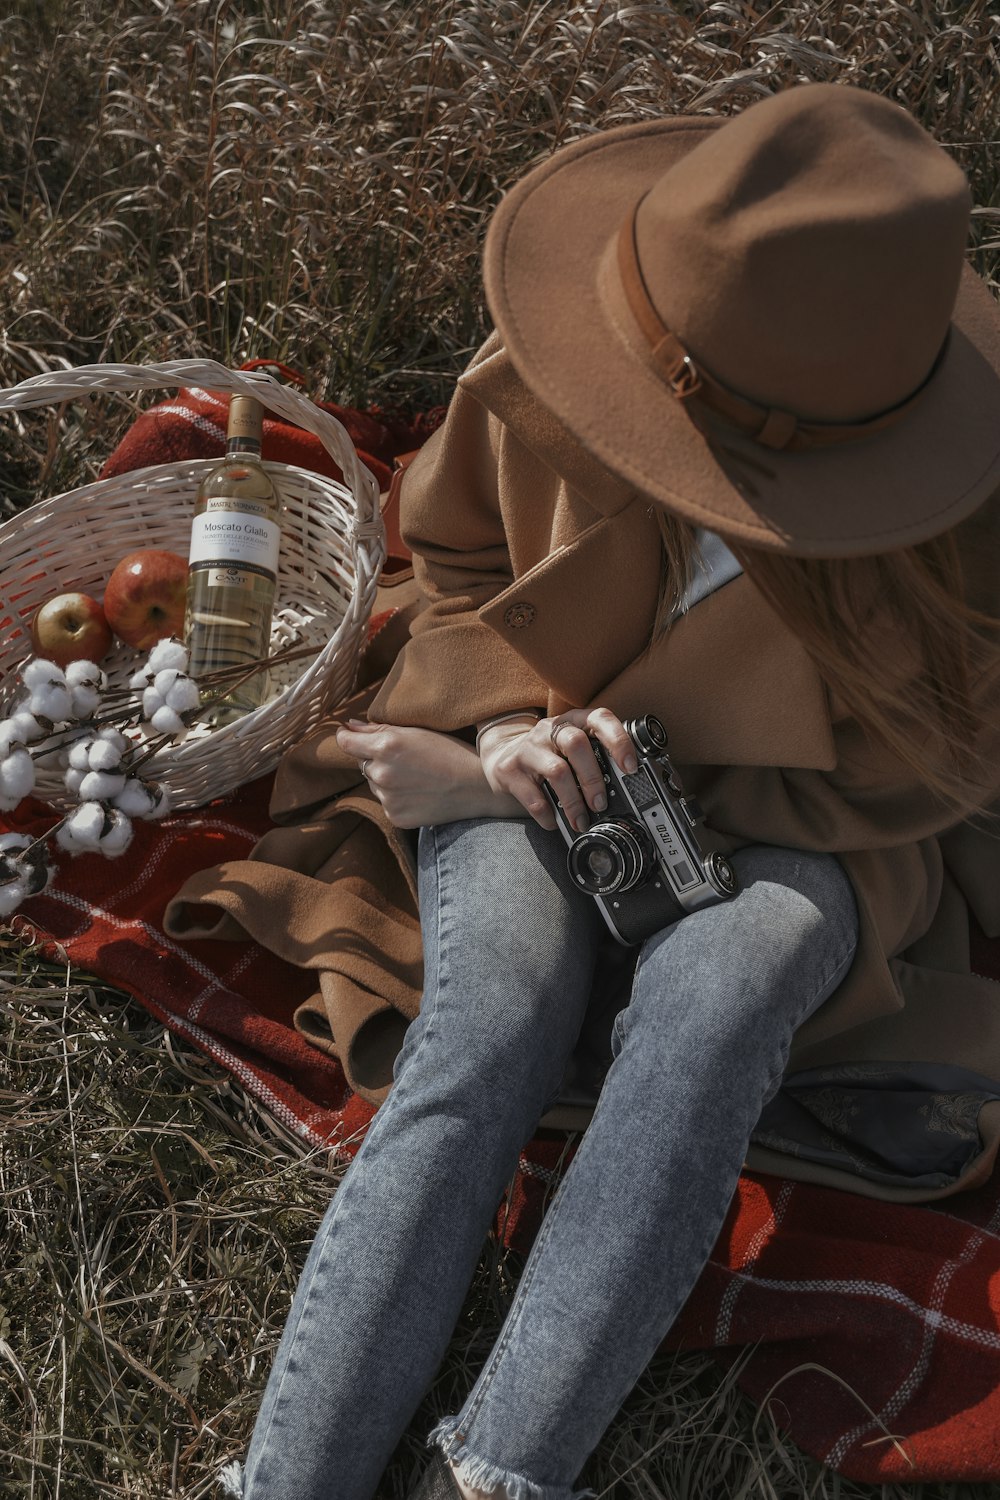 a person sitting on the ground with a camera and a basket of fruit